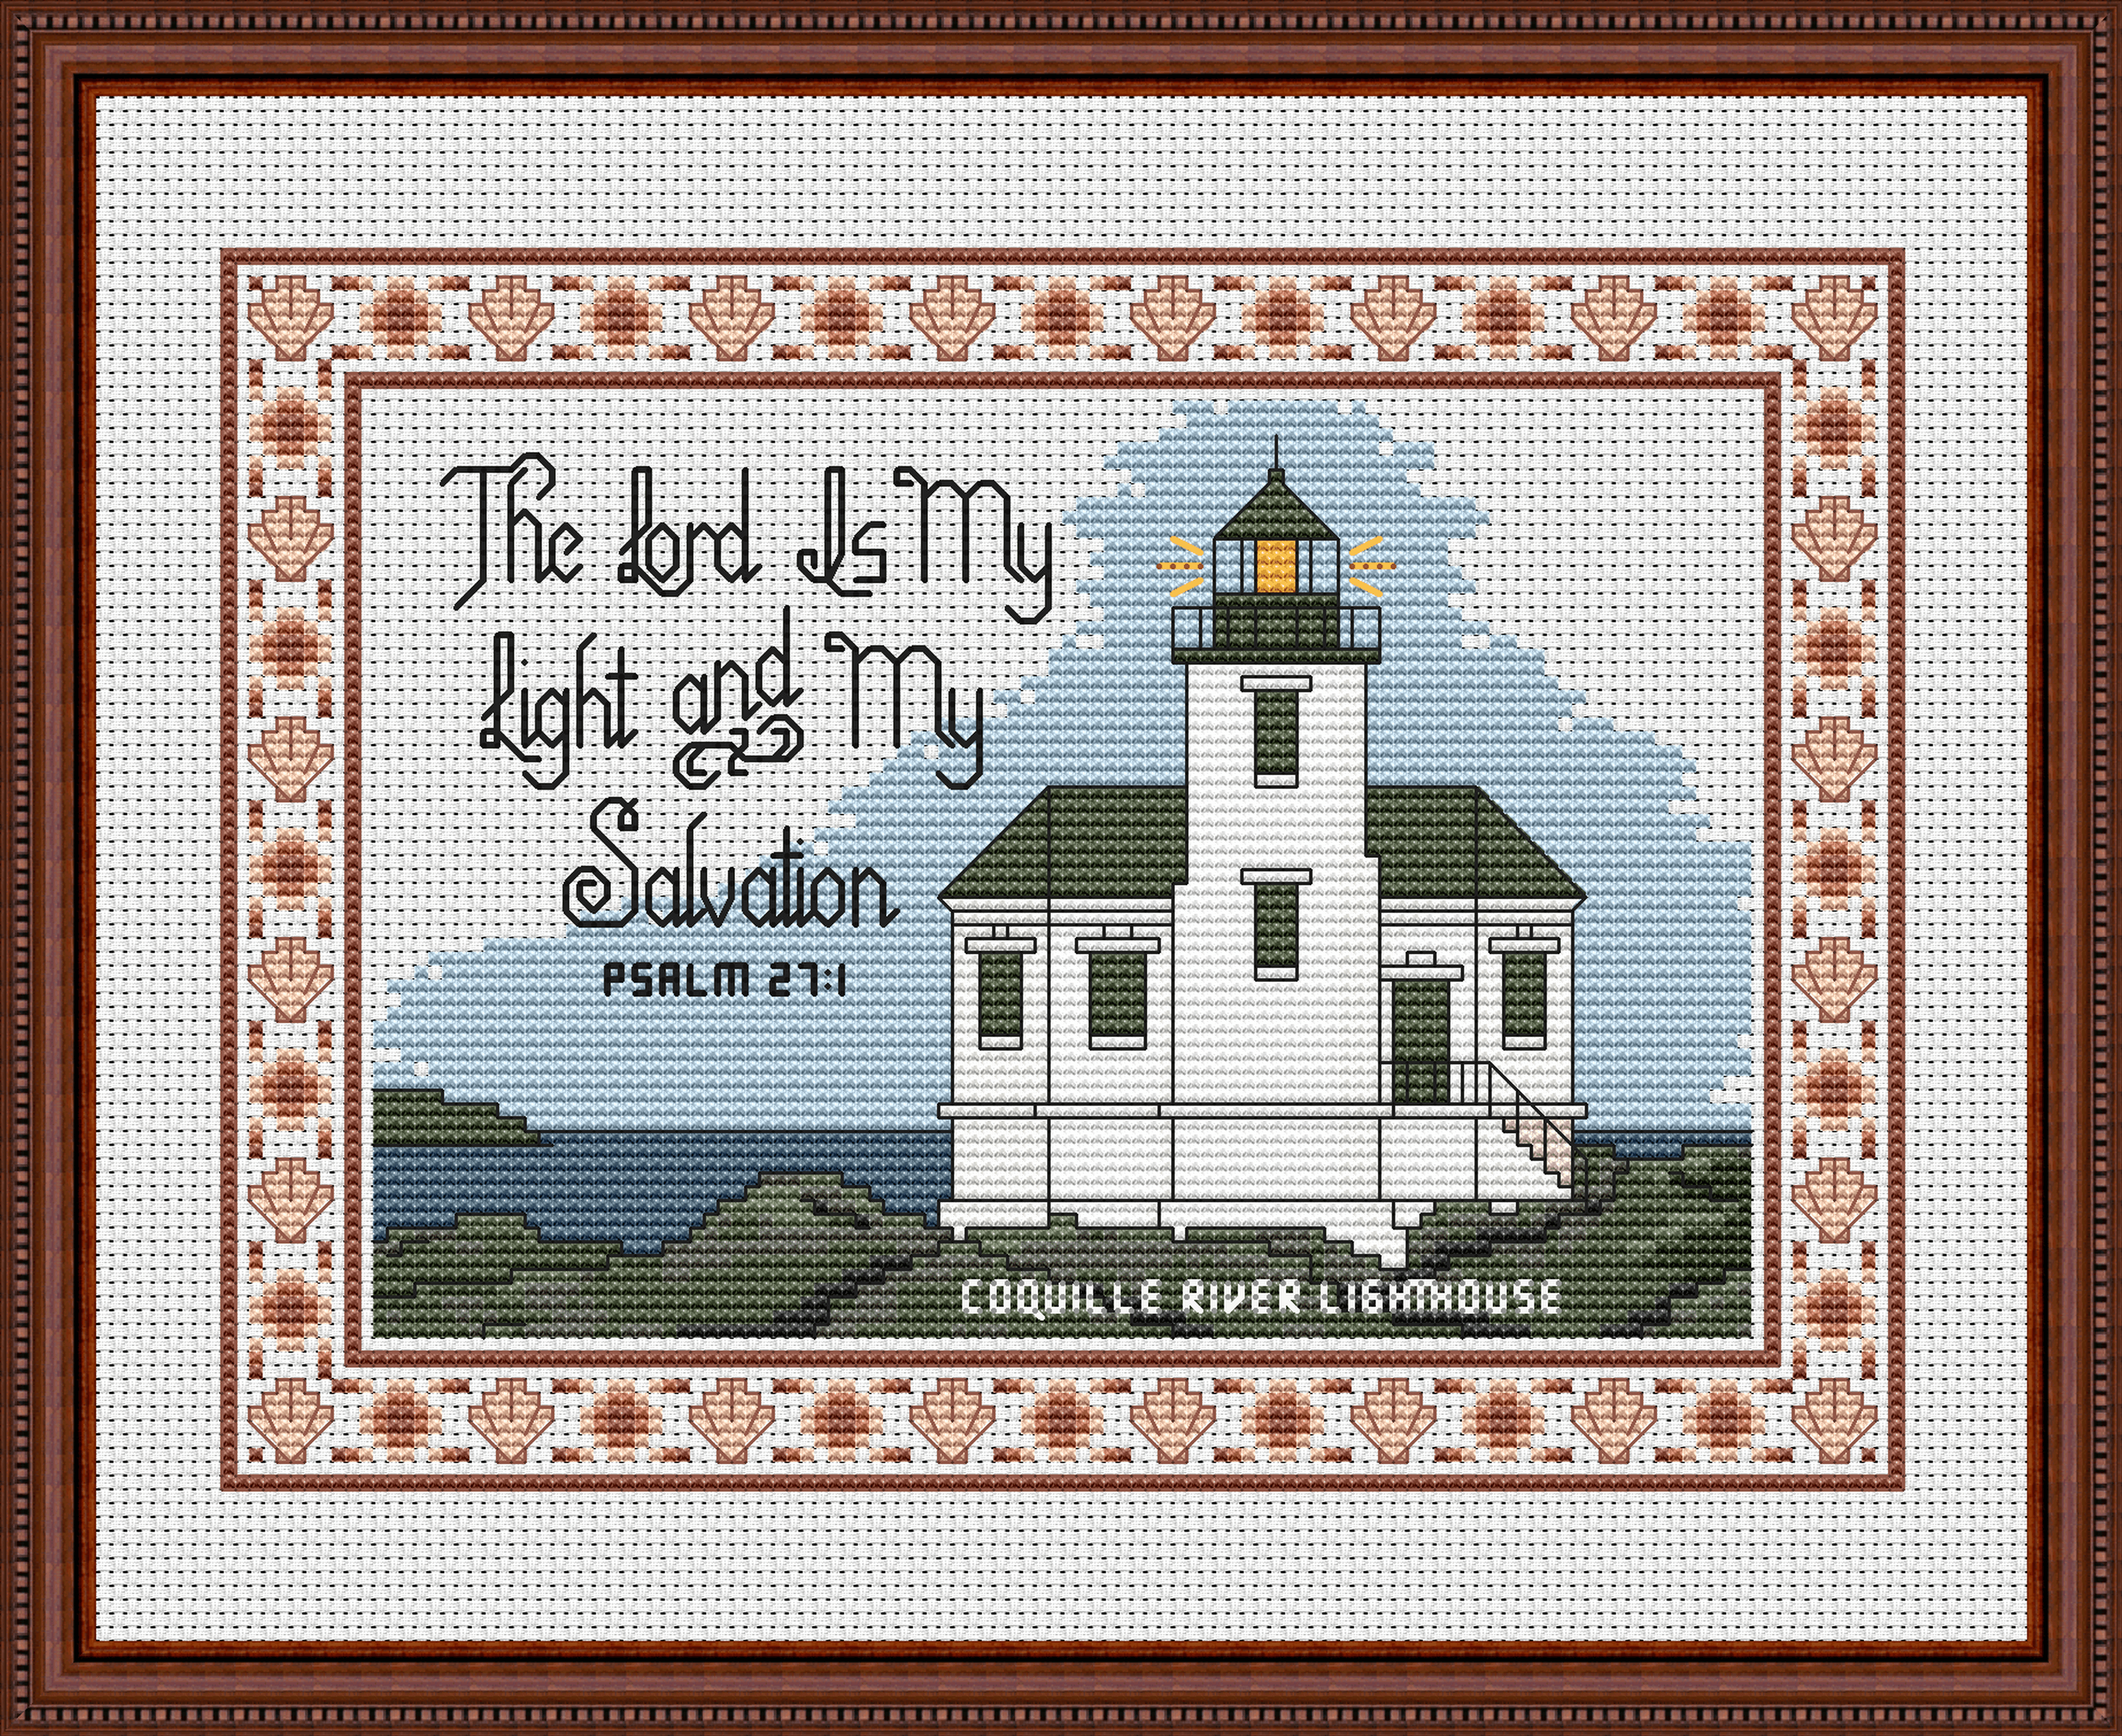 Coquille River Lighthouse Bible Verse Cross Stitch Pattern 845